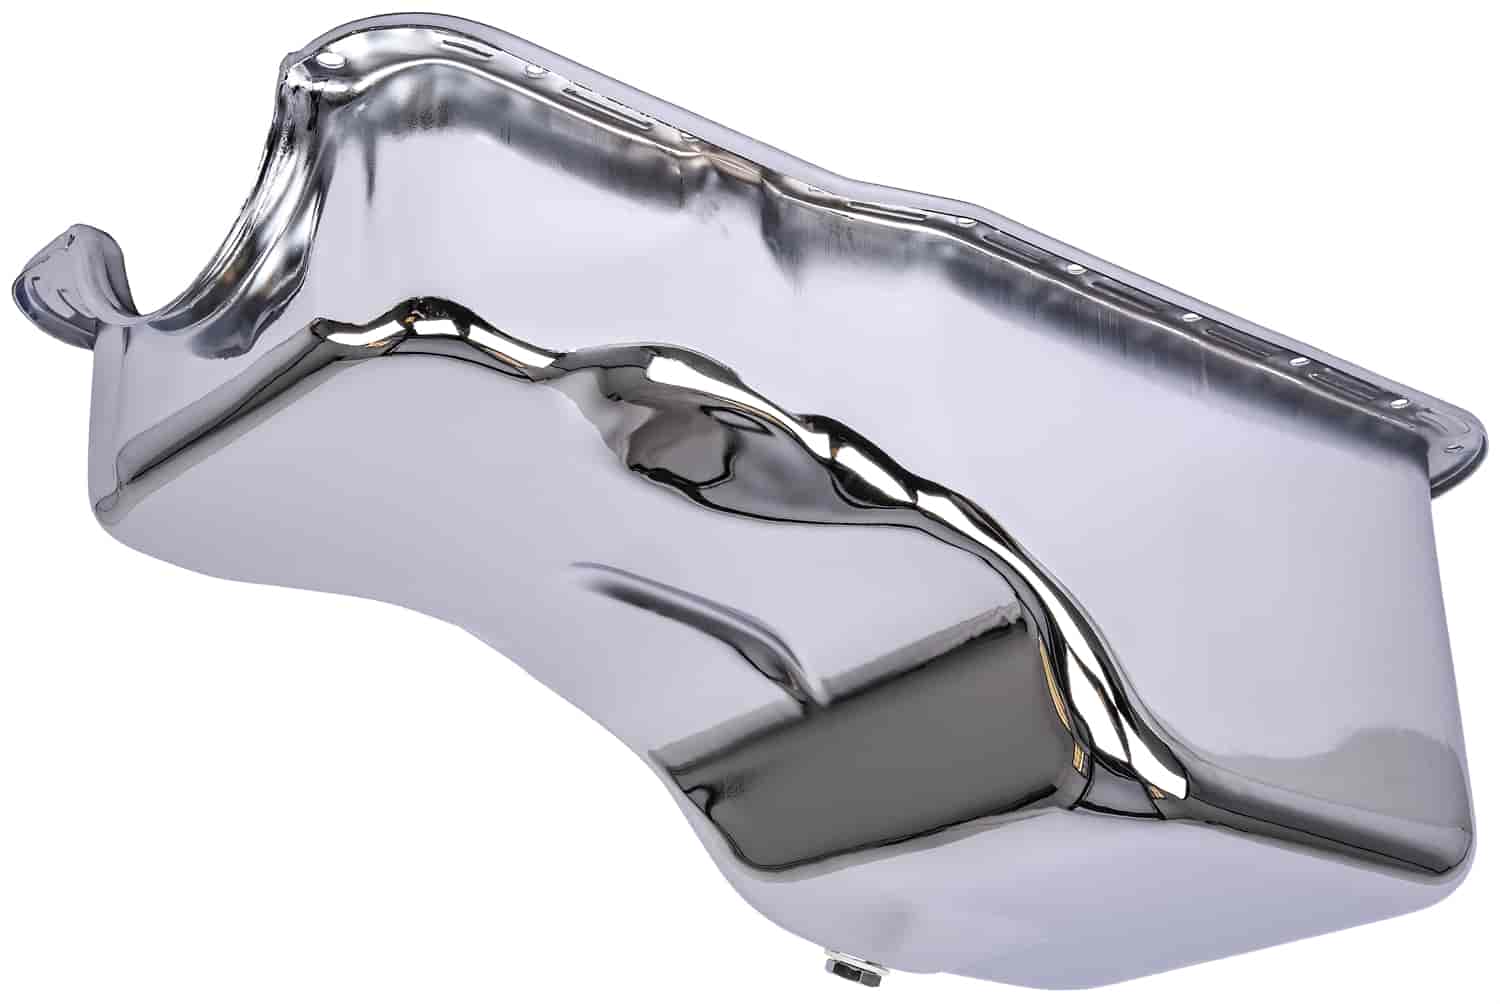 Stock-Style Replacement Oil Pan for 1965-1987 Small Block Ford 260-302 [Chrome]